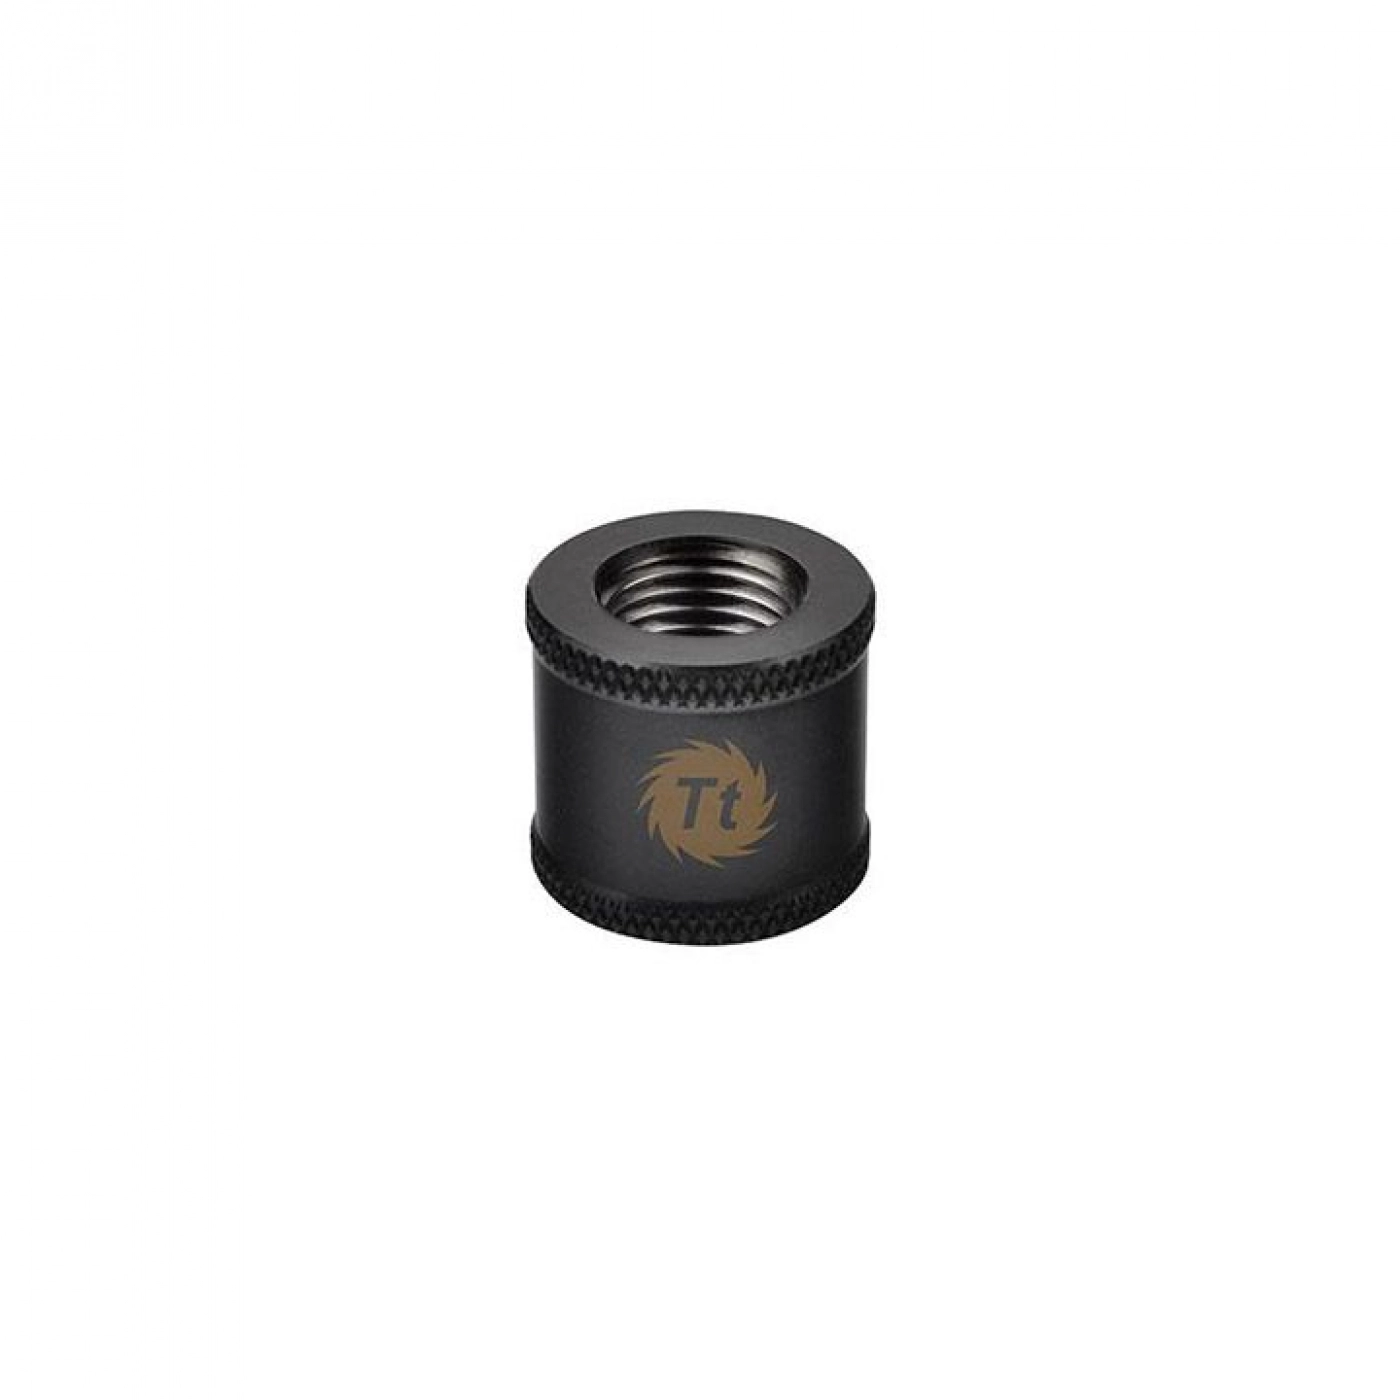 Купити Фітинг Thermaltake Pacific G1/4 Female to Female 20mm Extender - Black (CL-W049-CU00BL-A) - фото 2